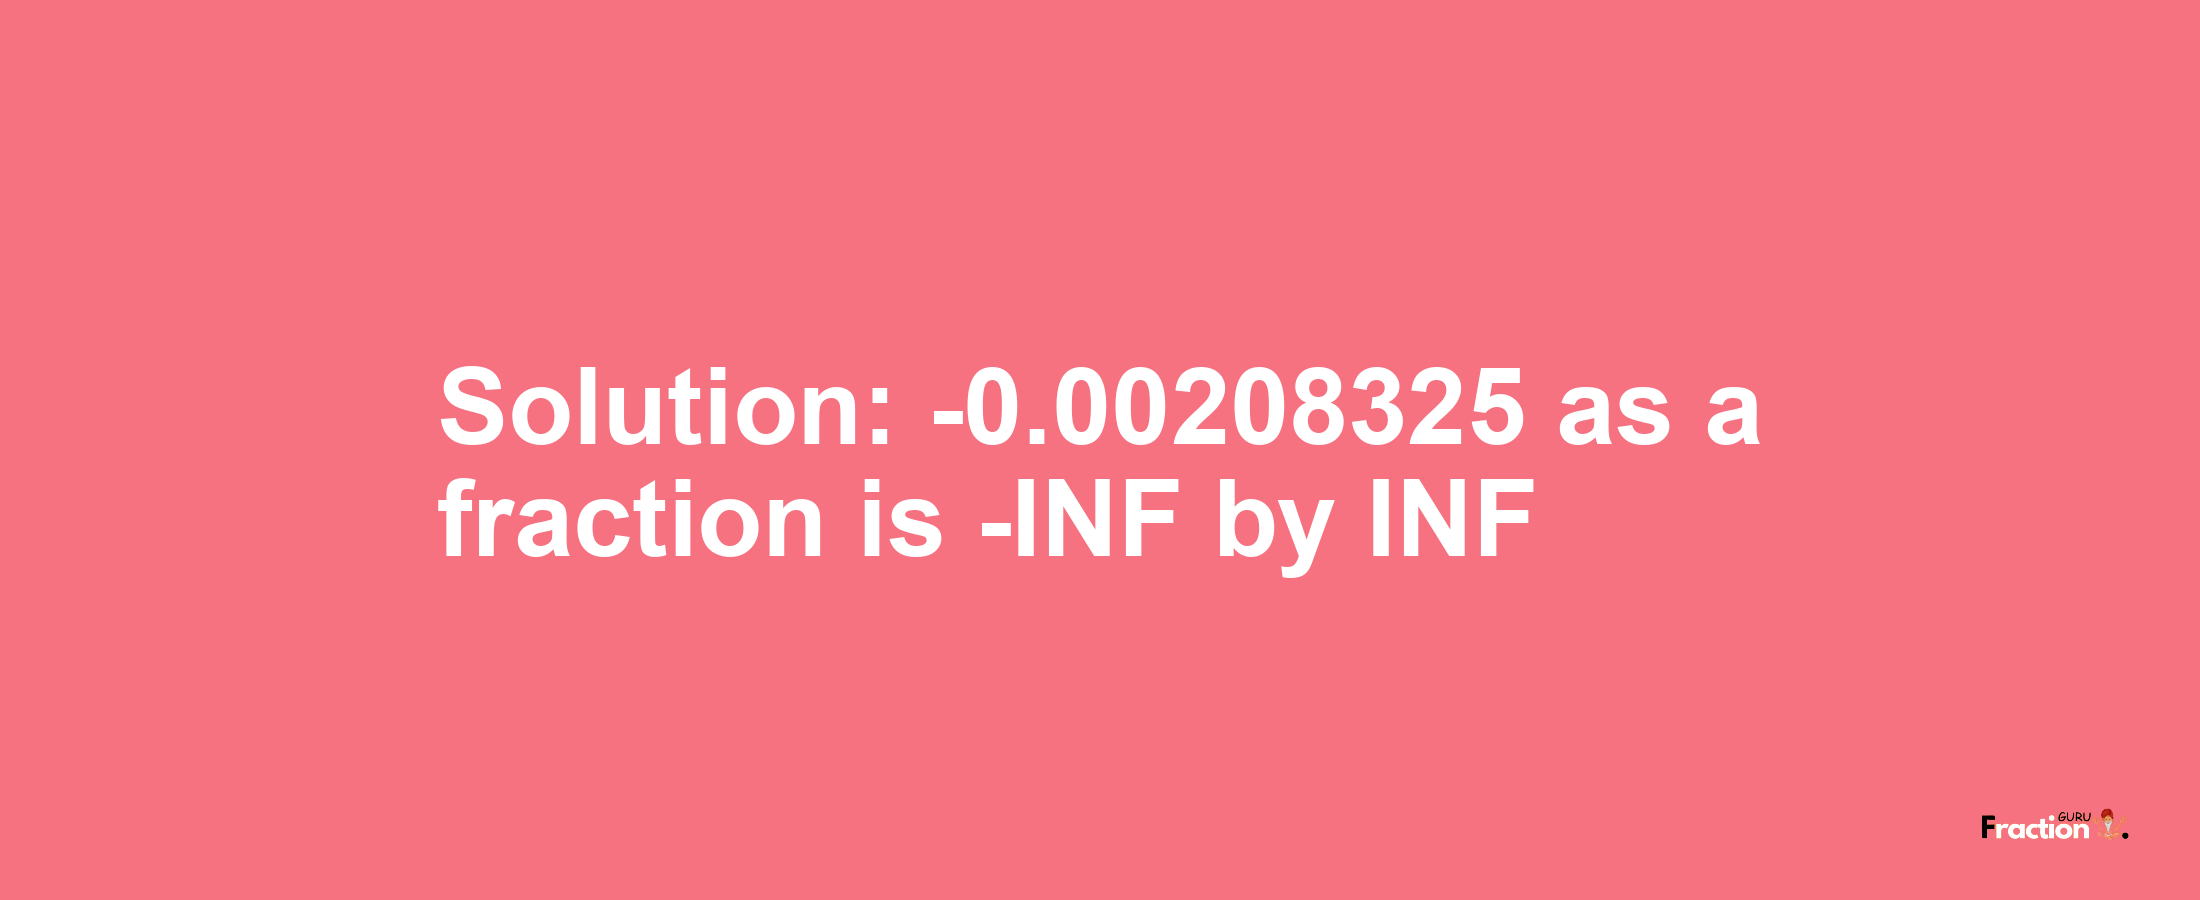 Solution:-0.00208325 as a fraction is -INF/INF